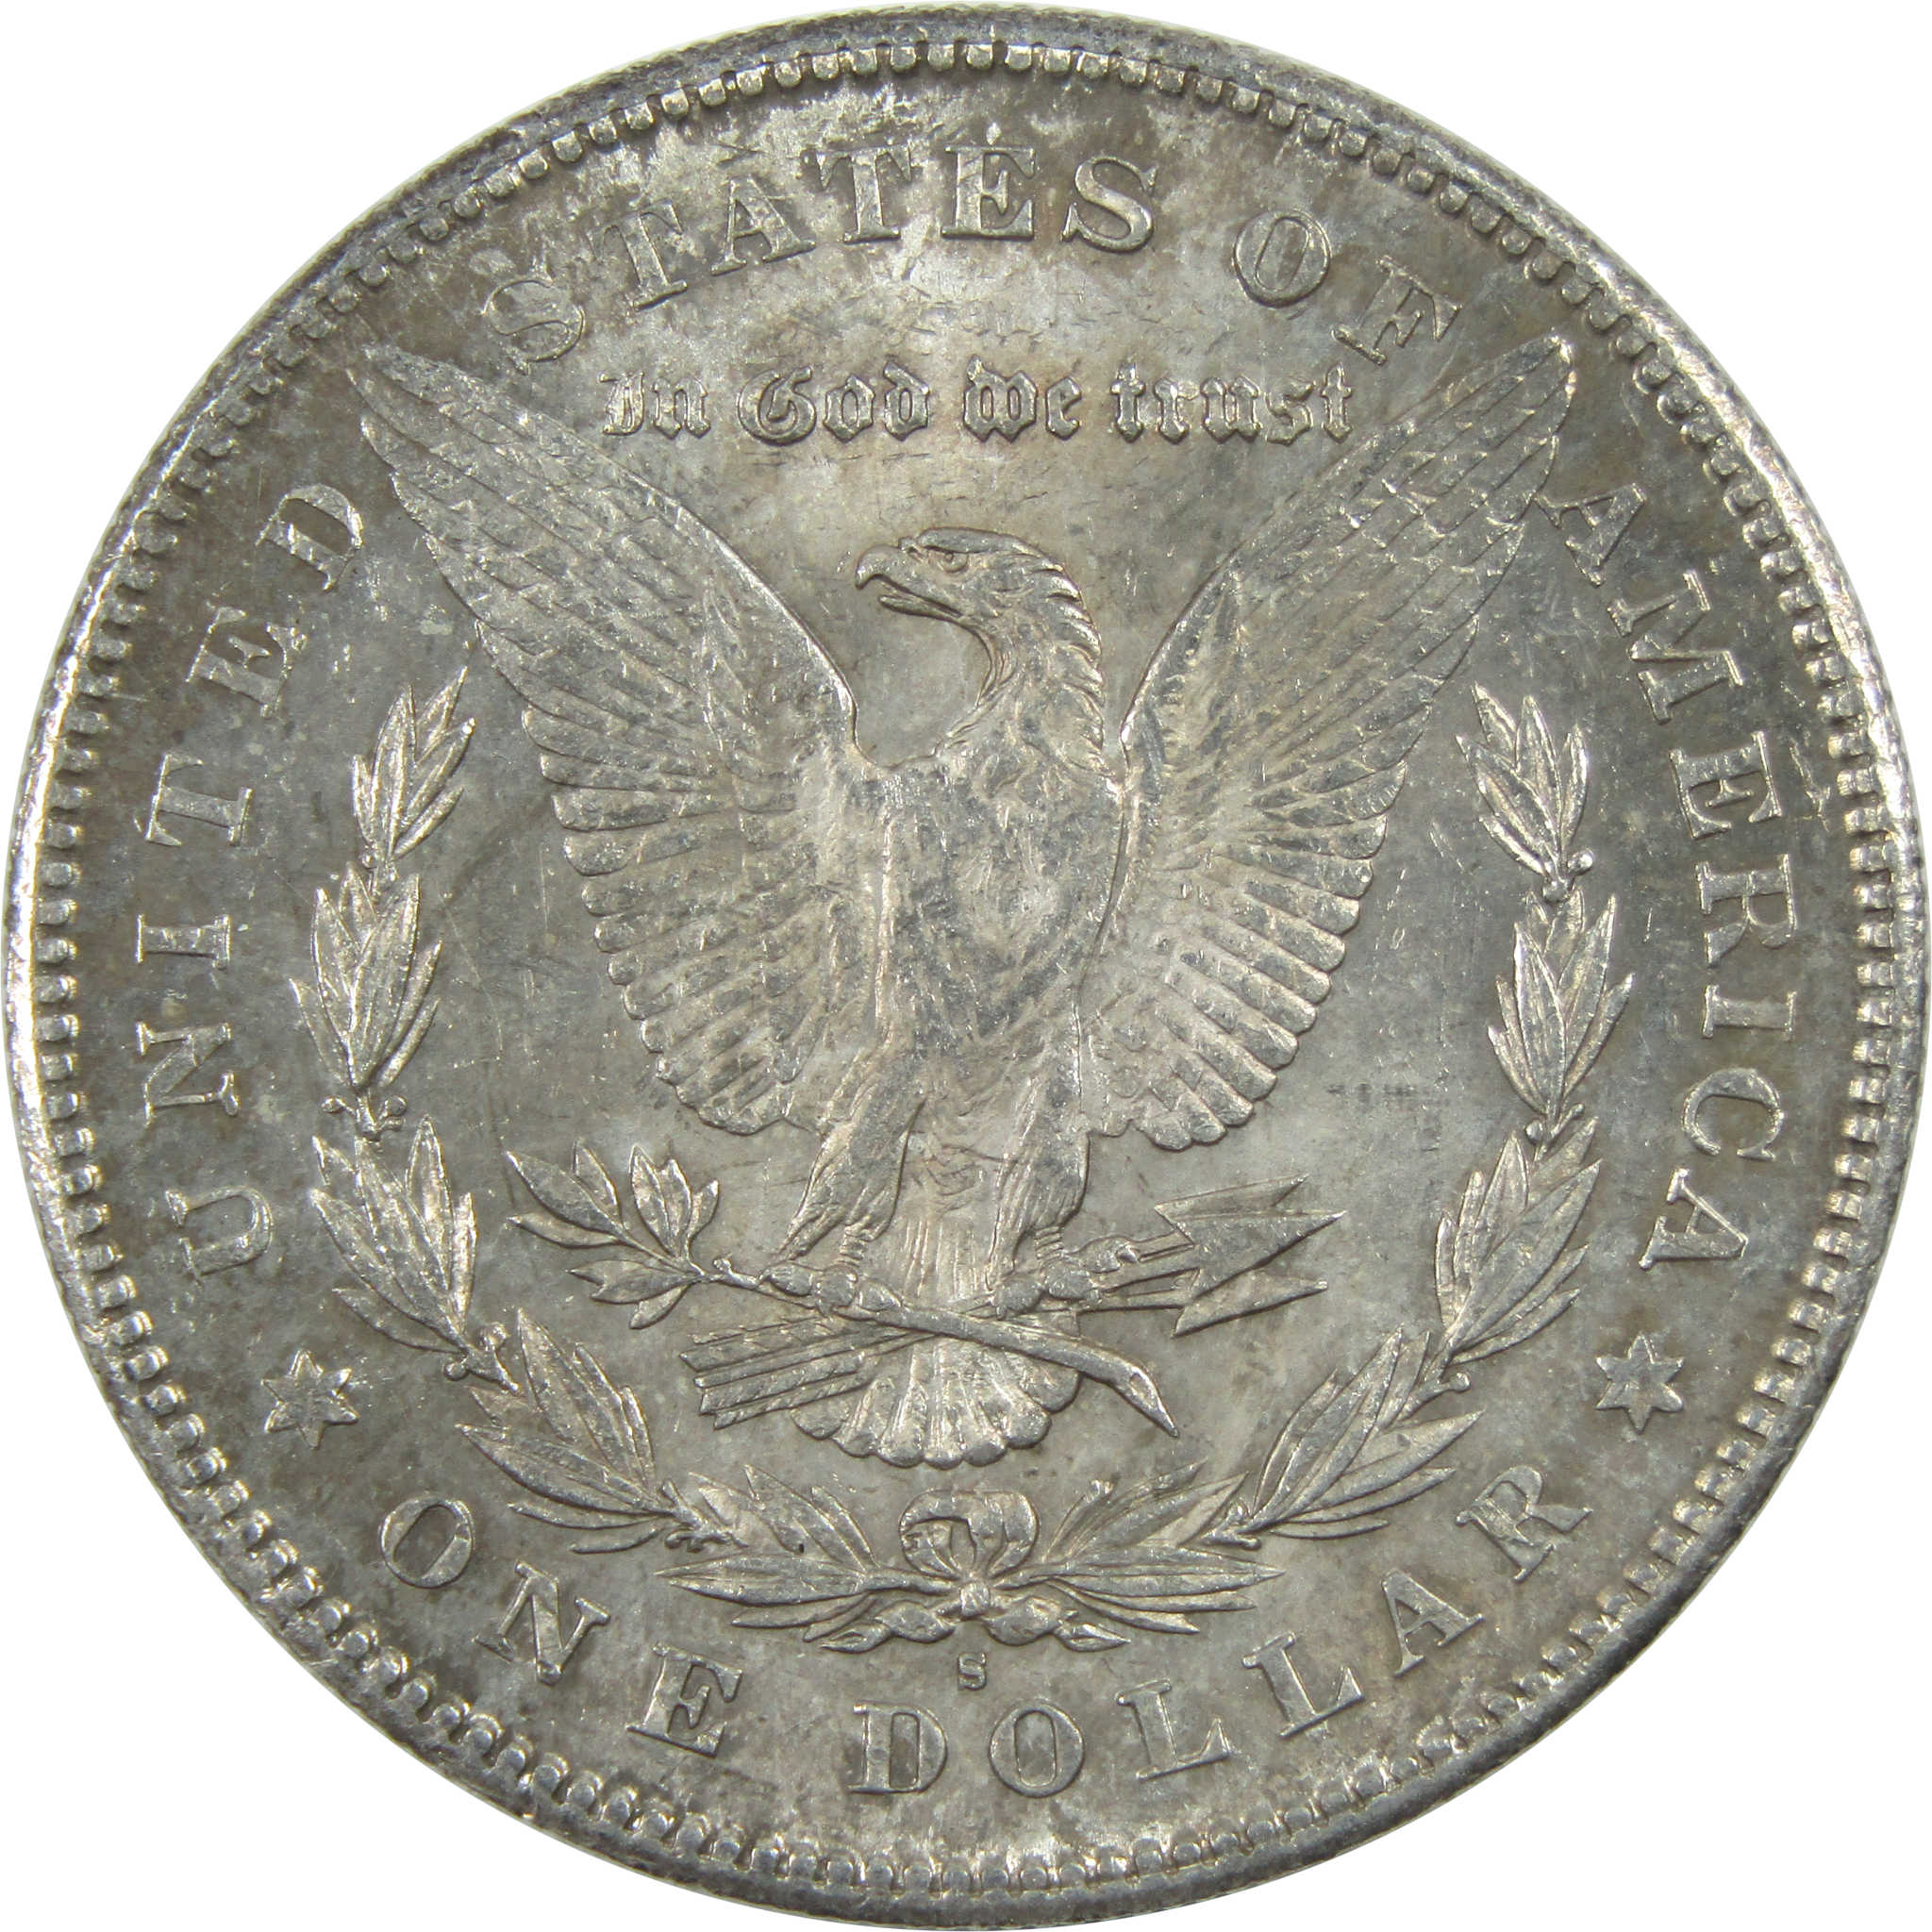 1878 S Morgan Dollar AU About Uncirculated Silver $1 Coin SKU:I11682 - Morgan coin - Morgan silver dollar - Morgan silver dollar for sale - Profile Coins &amp; Collectibles